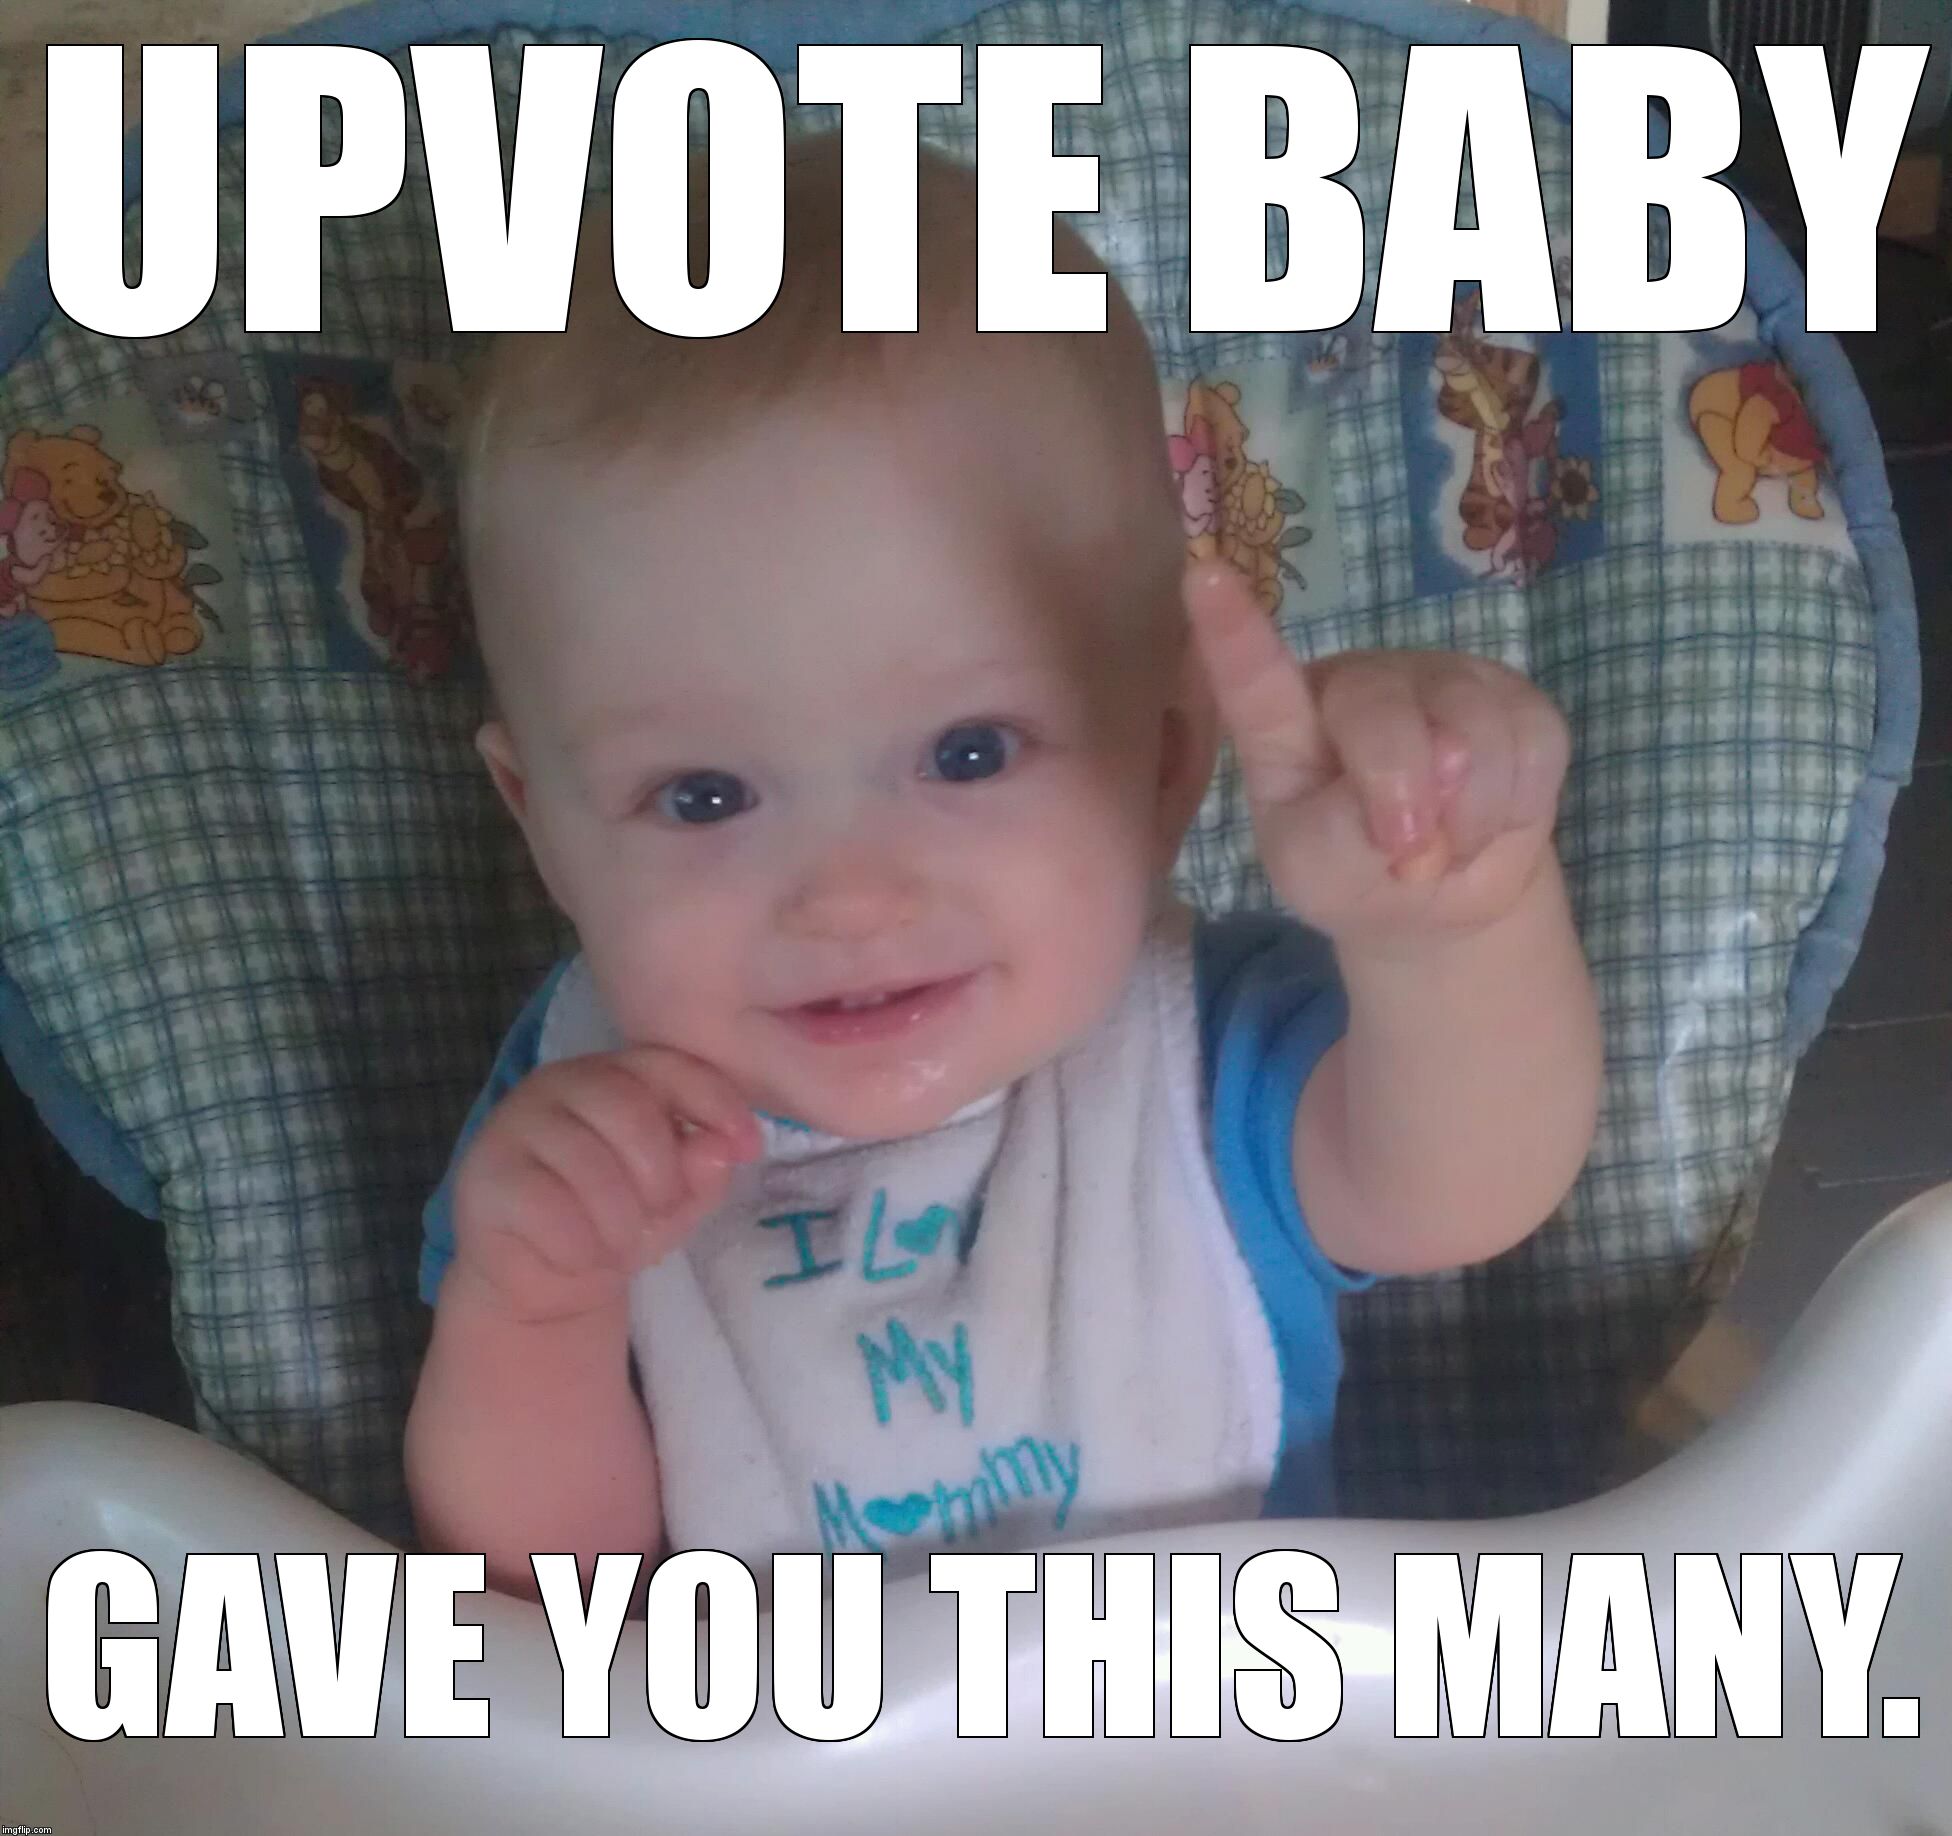 just one baby | UPVOTE BABY GAVE YOU THIS MANY. | image tagged in just one baby | made w/ Imgflip meme maker